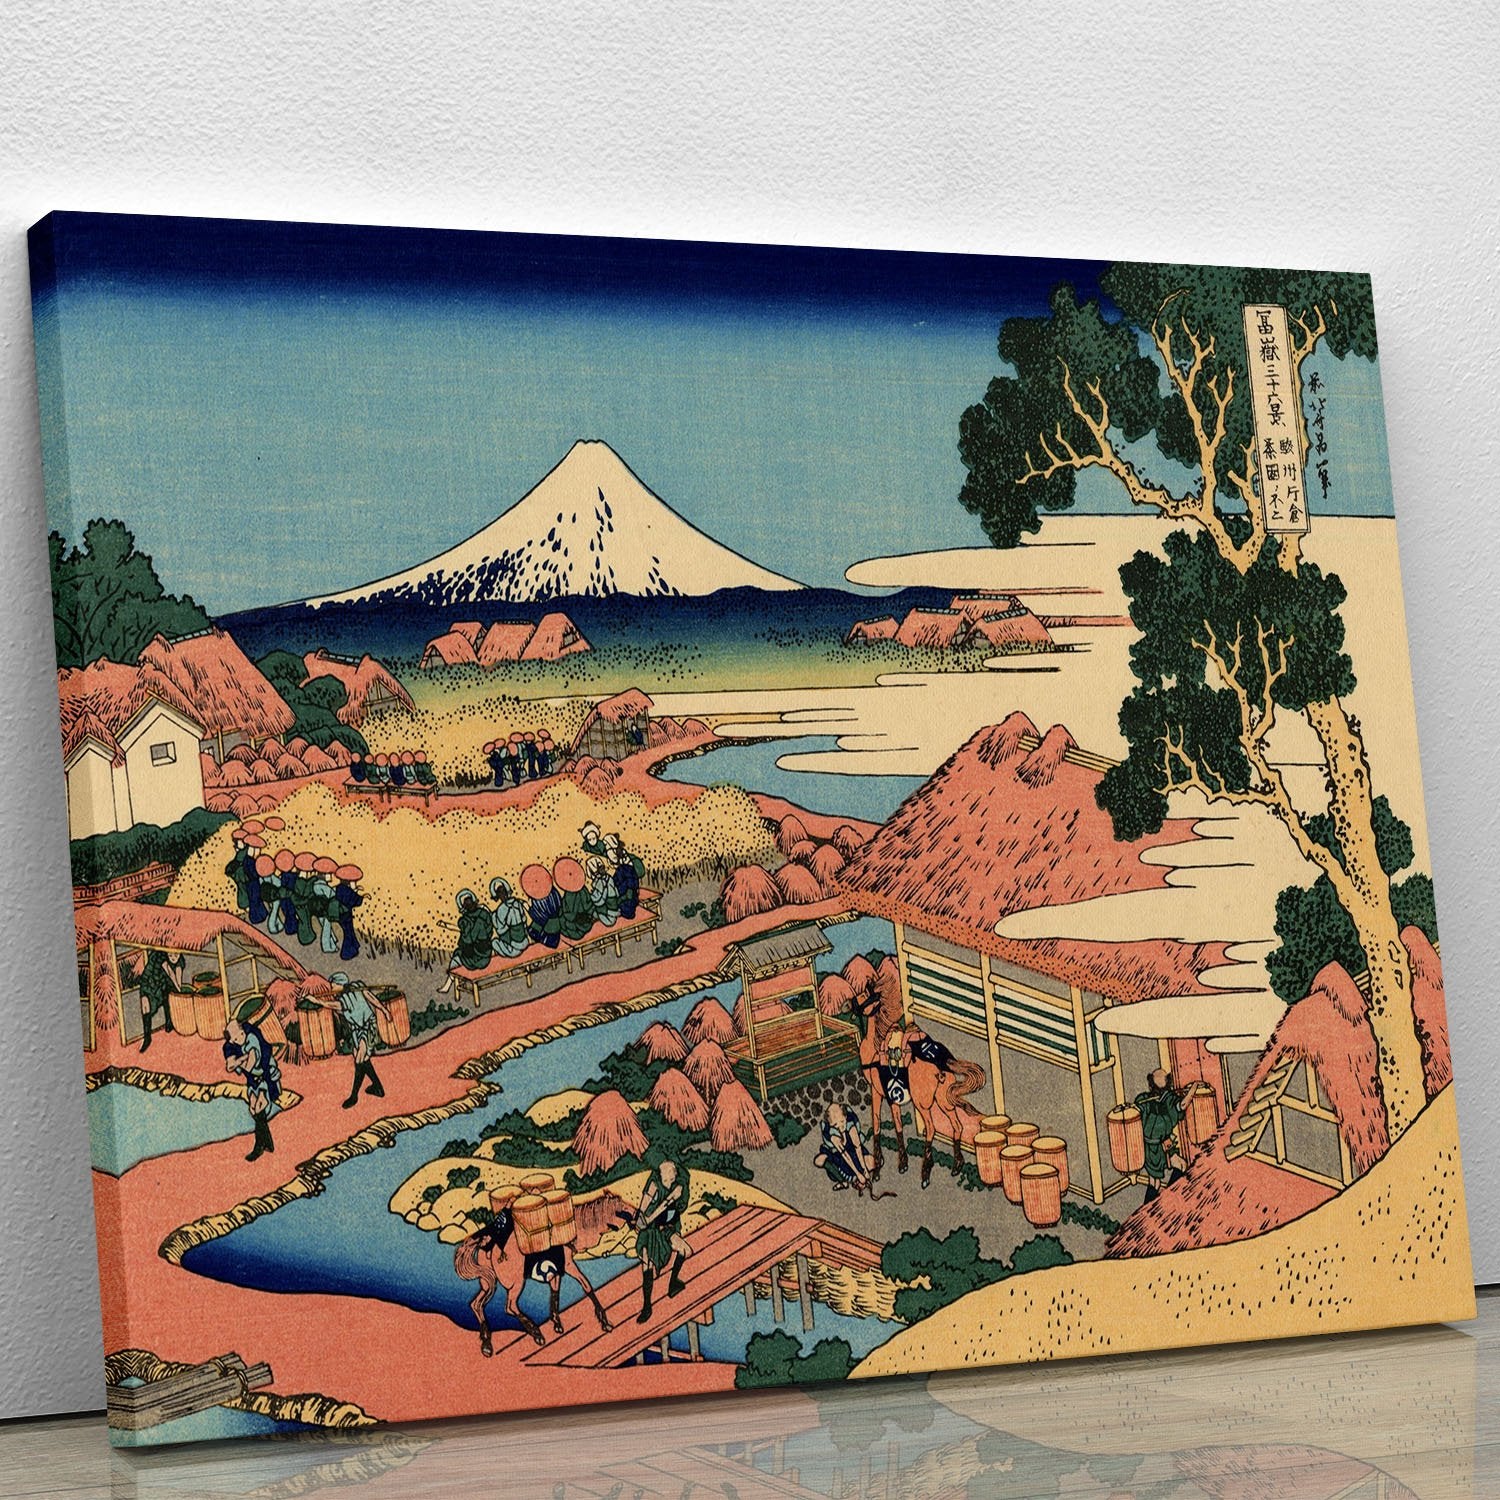 The Tea plantation by Hokusai Canvas Print or Poster